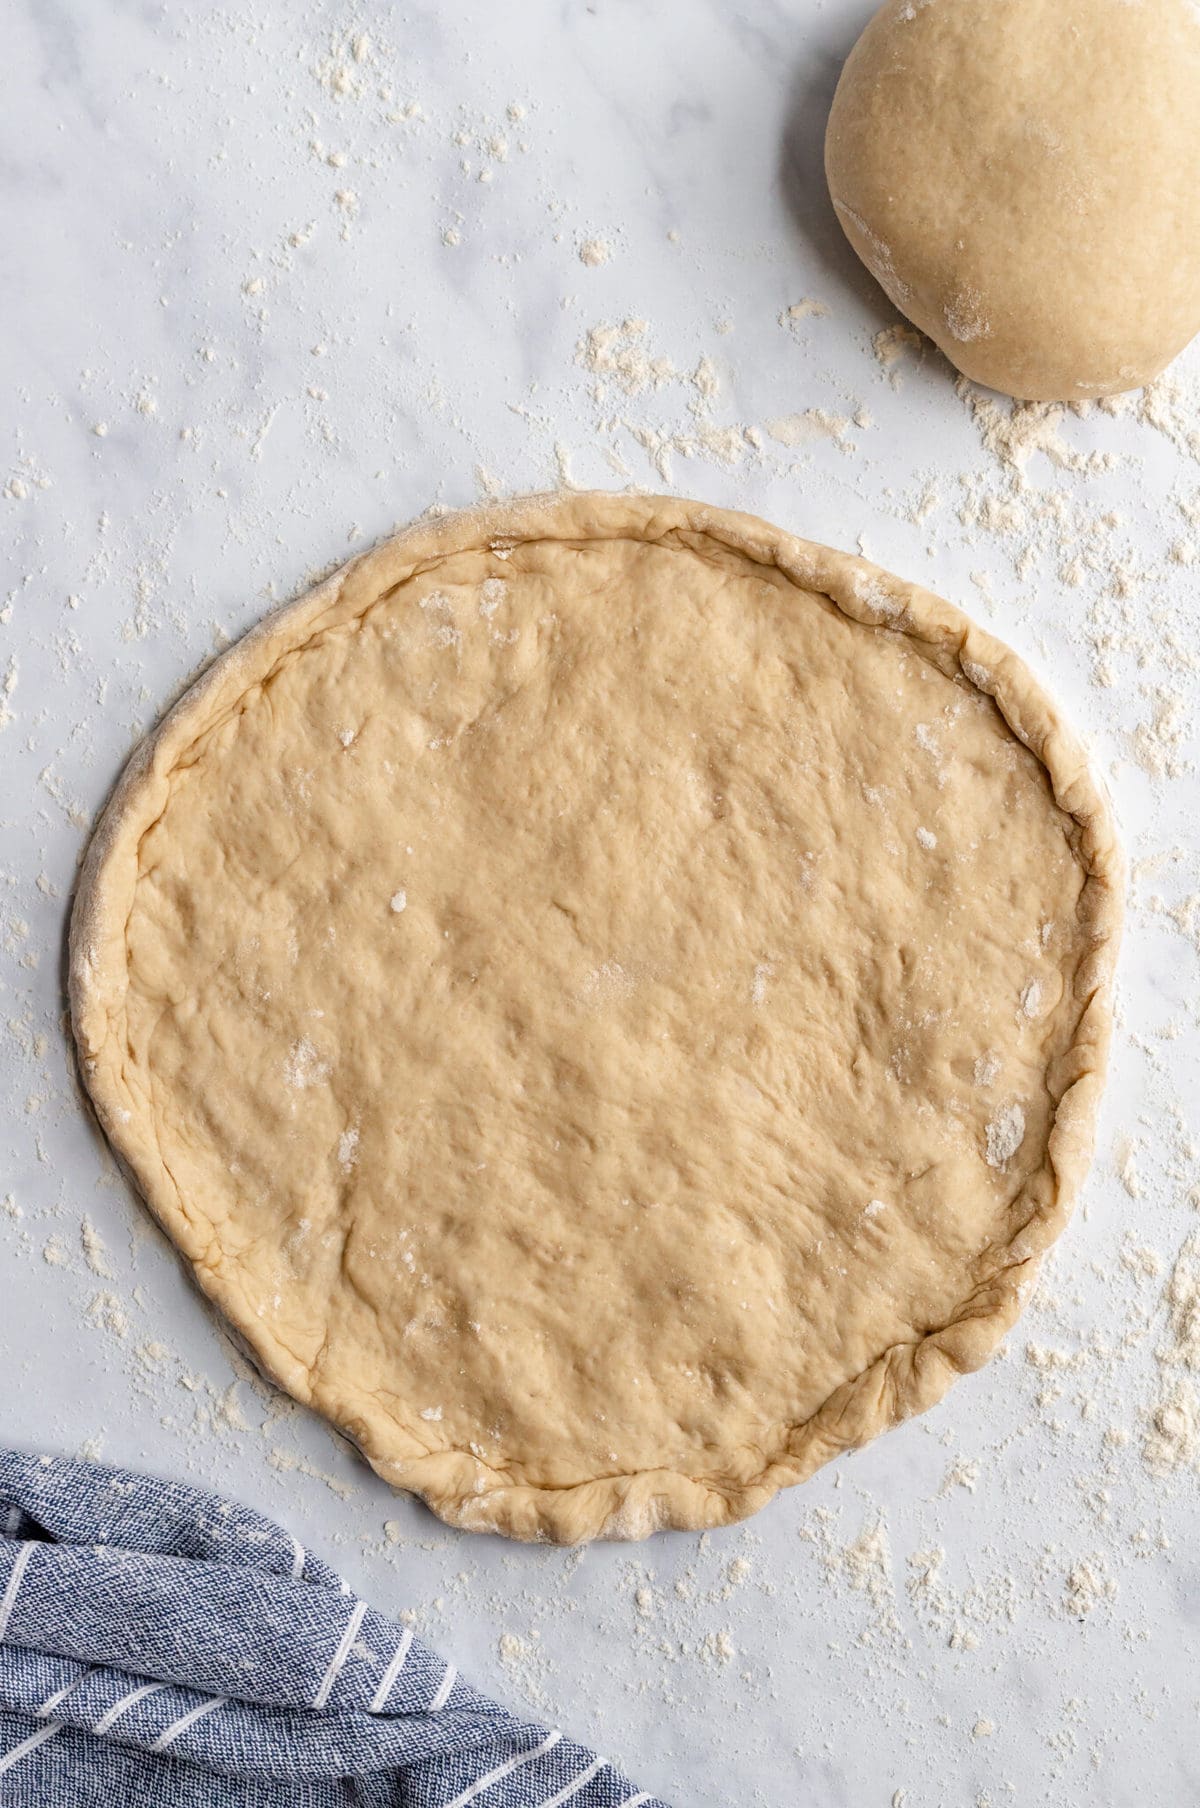 rolled out pizza dough into a crust shape